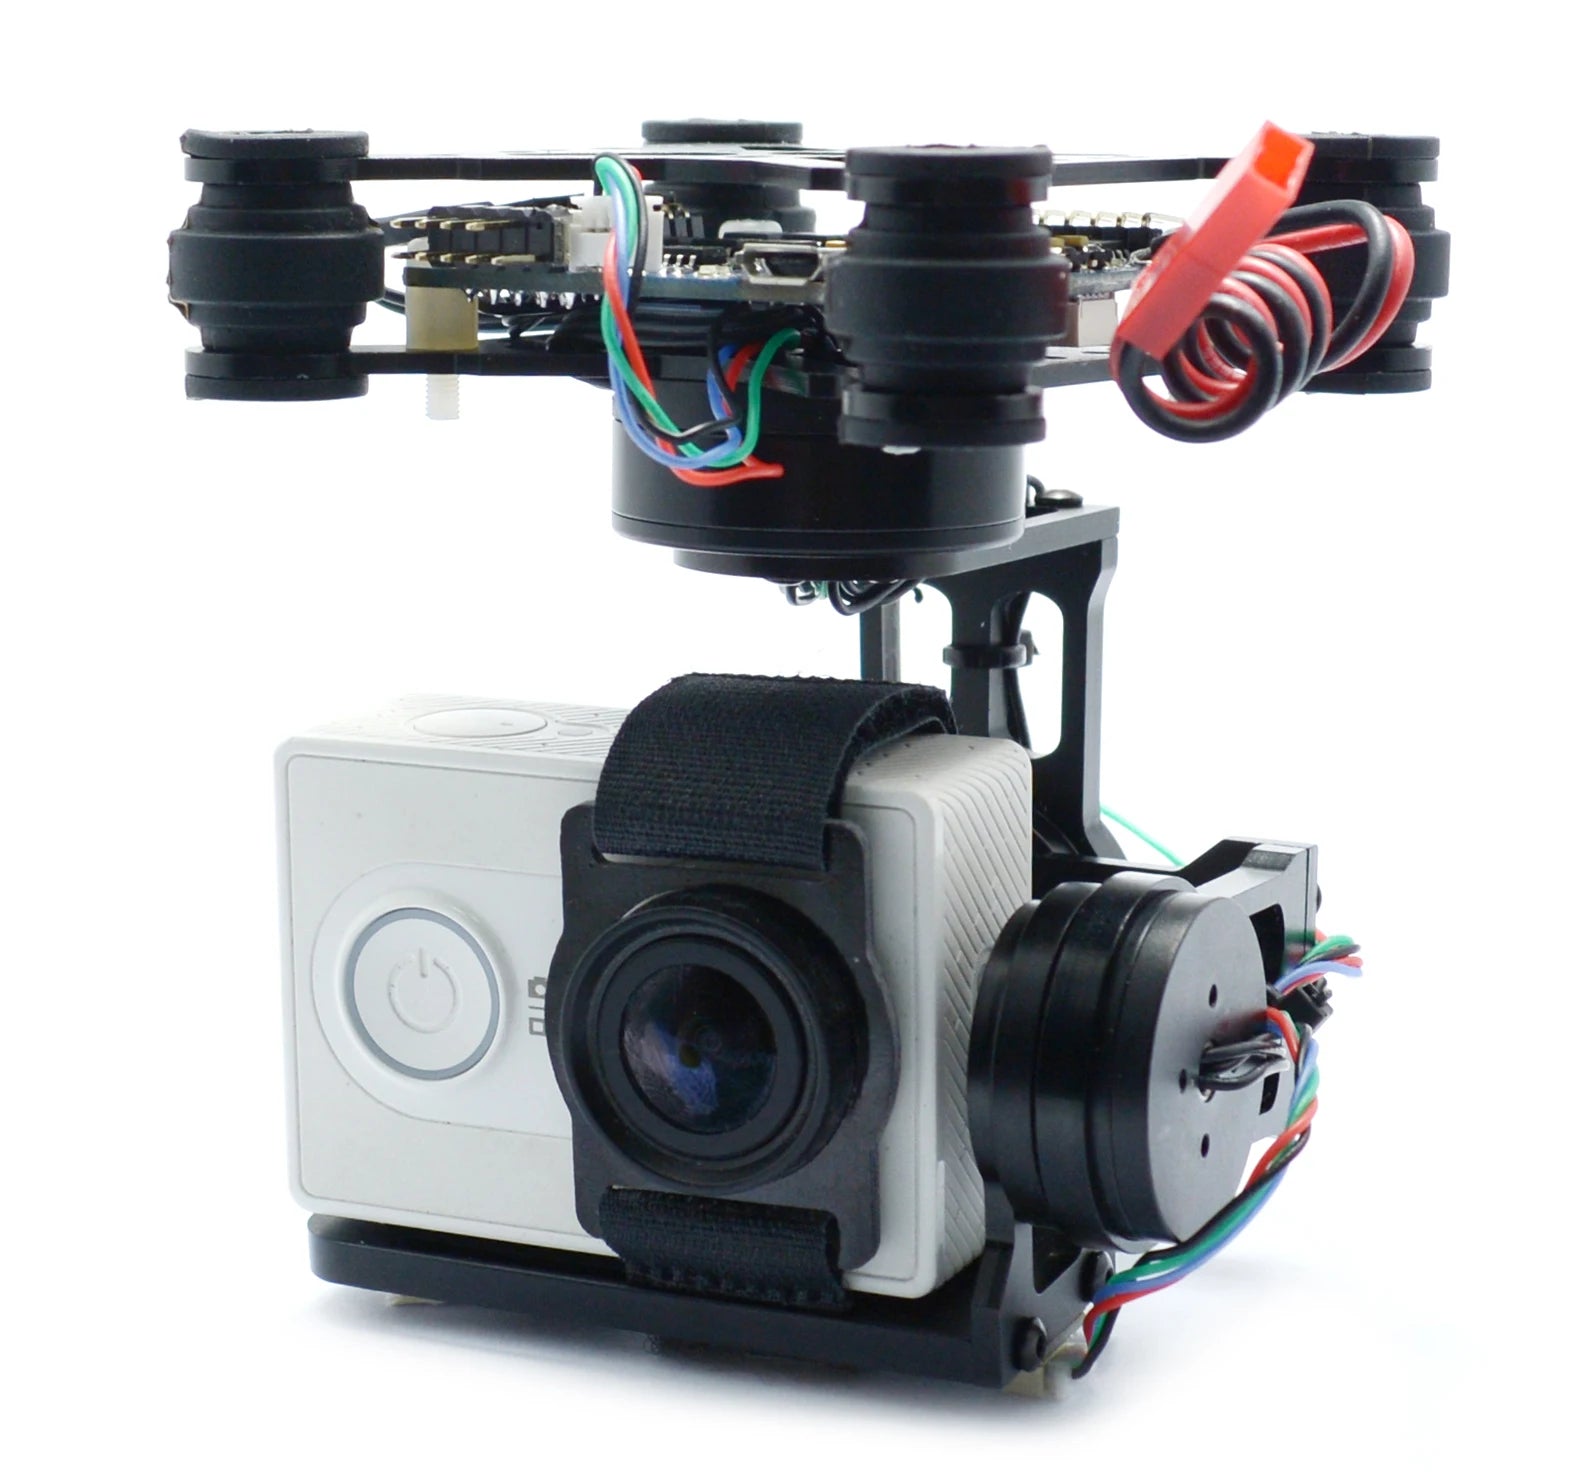 RTF 3 Axis 3Axis Brushless Gimbal, SPECIFICATIONS supply voltage:3S battery motor current: max